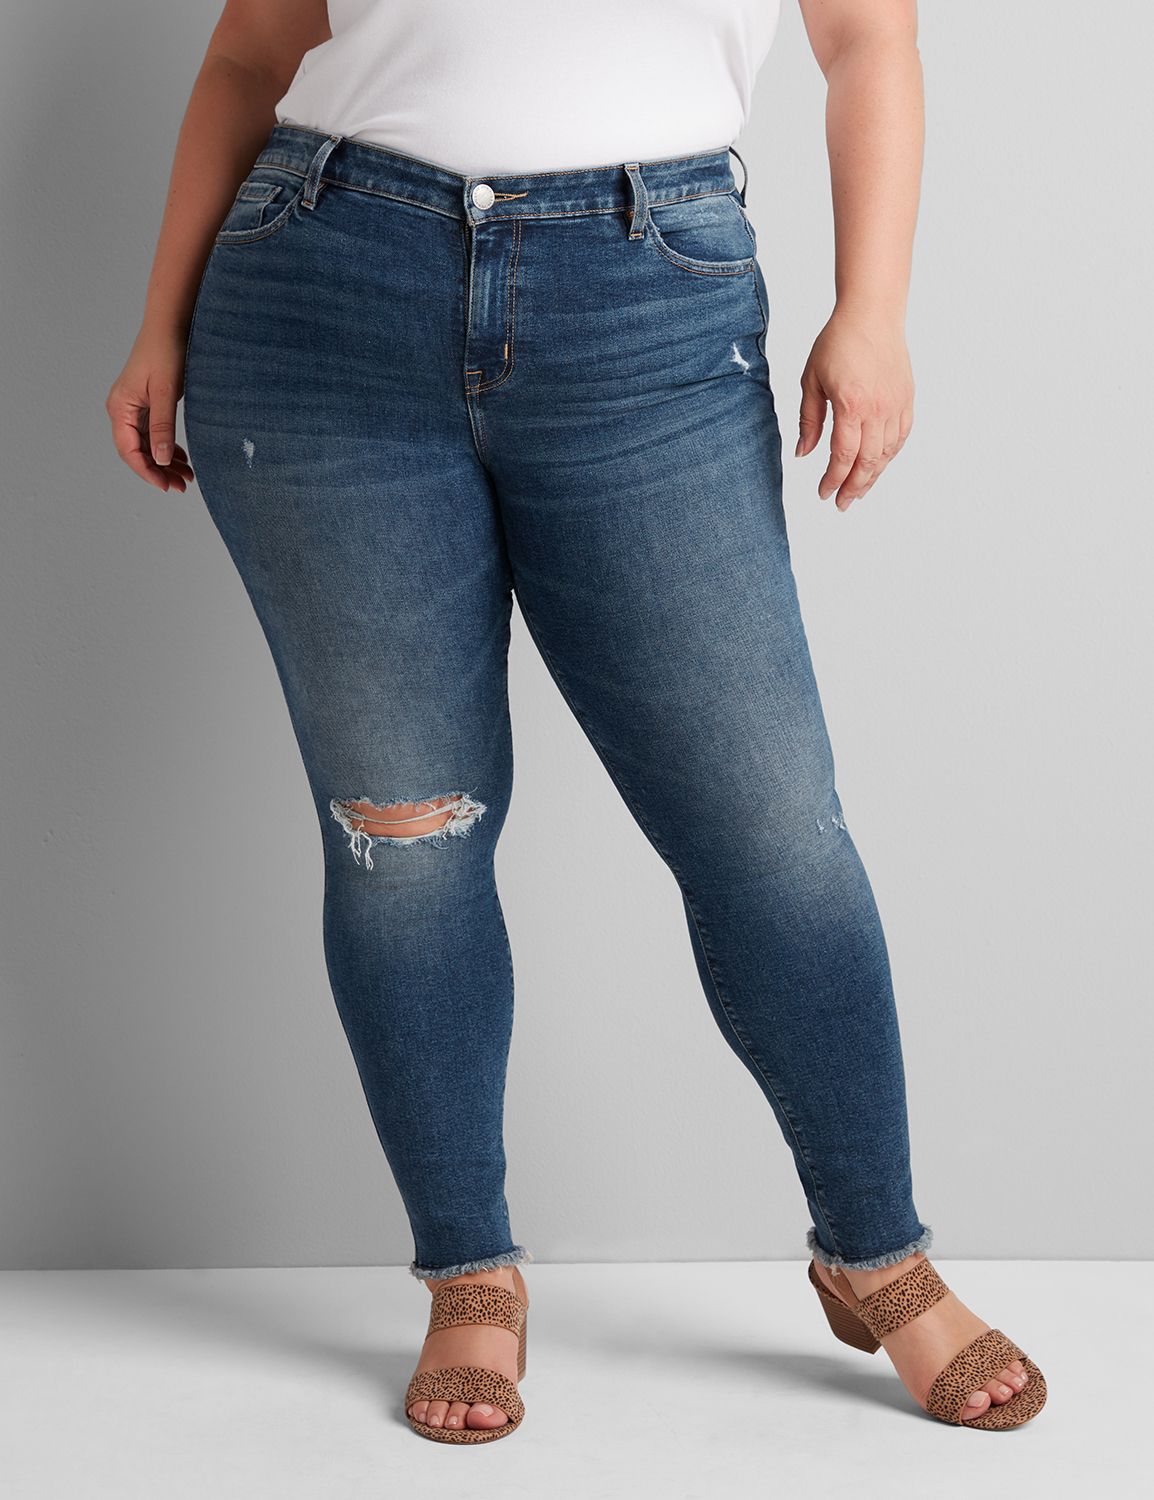 lane bryant high waisted jeans